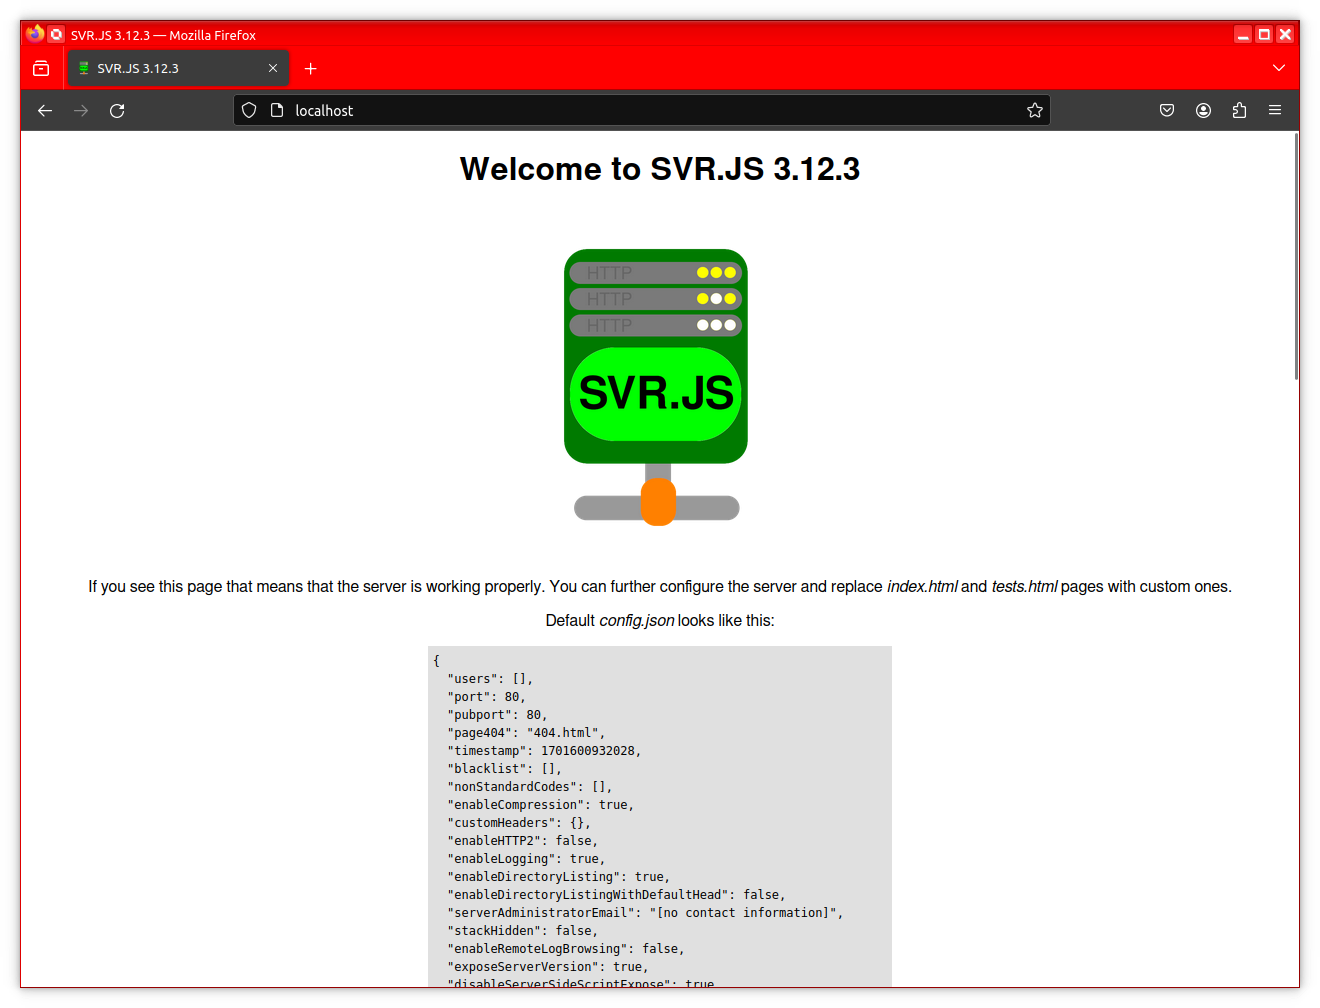 SVR.JS running for first time